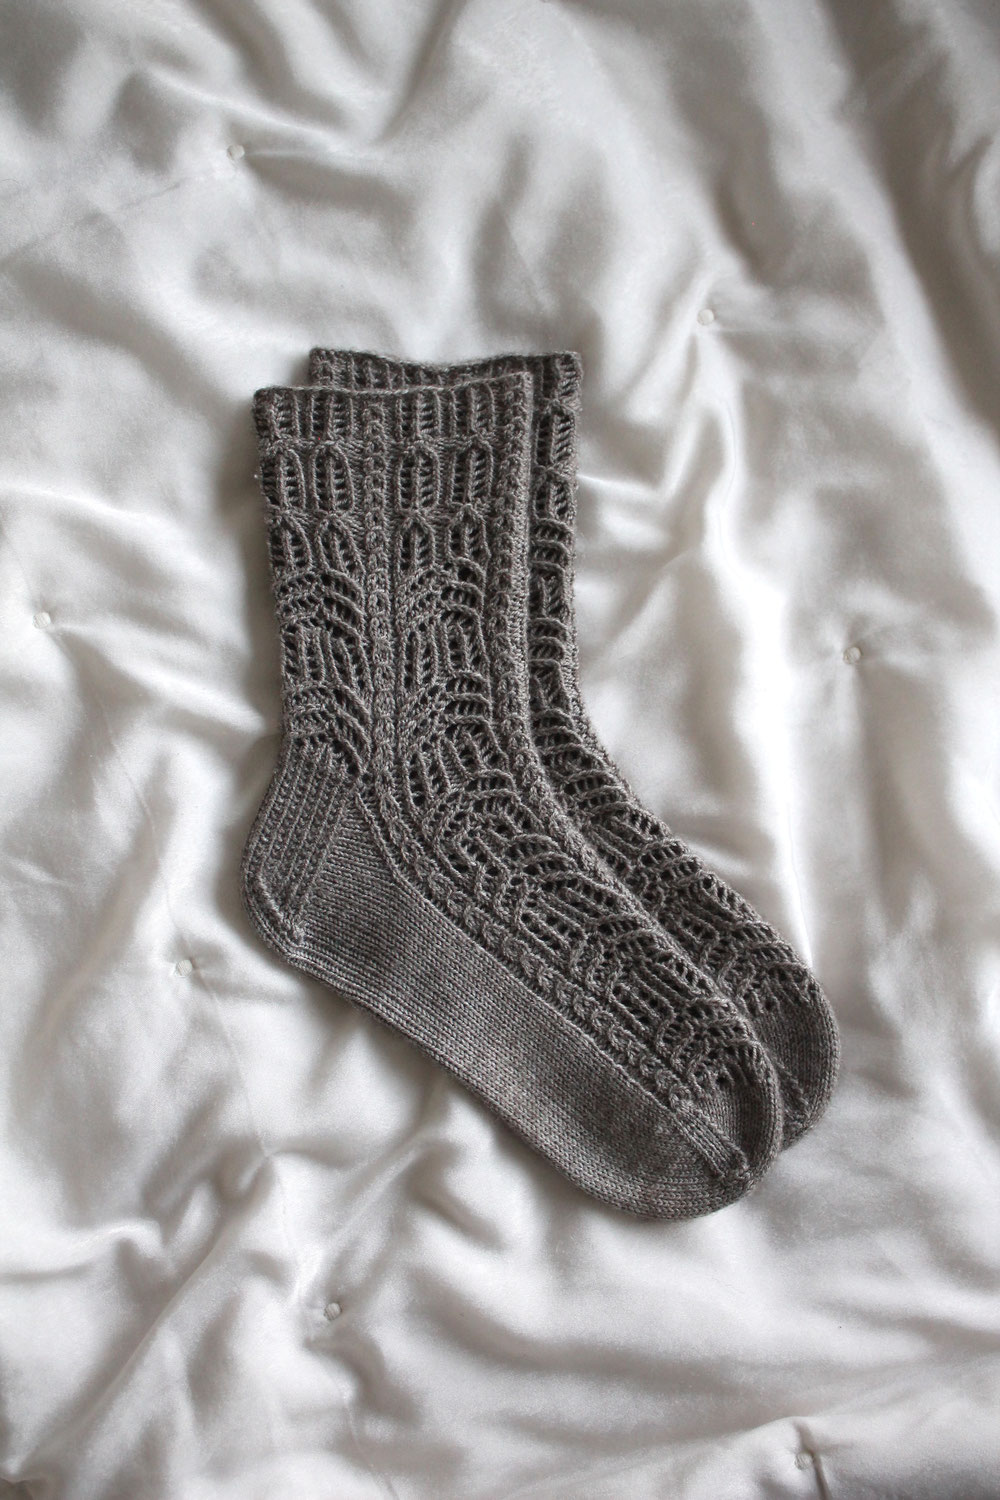 Socks, and your Immune System